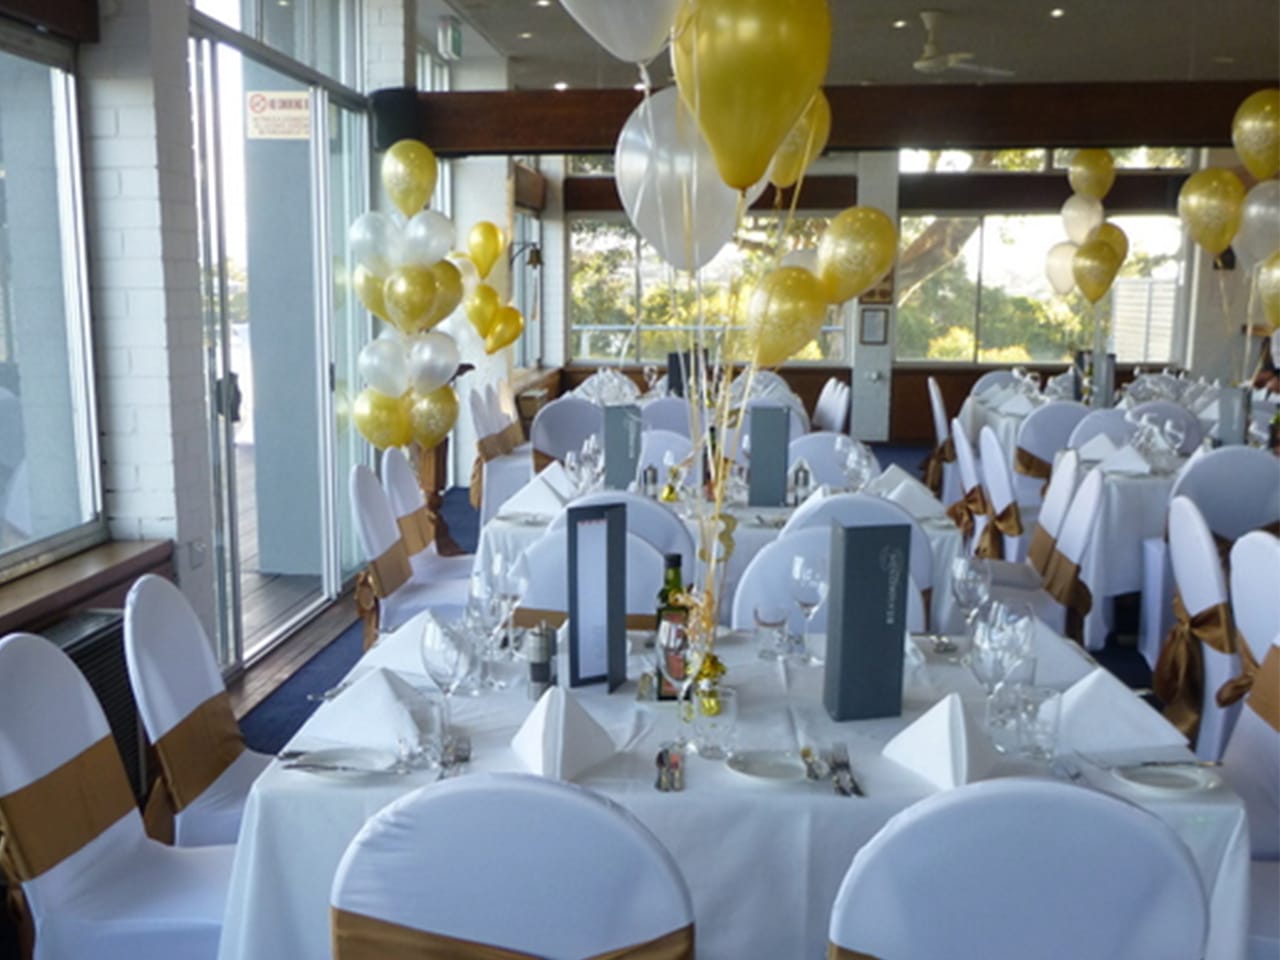 White And Yellow Theme In Tables And Chairs With Balloons Inside The Function Room